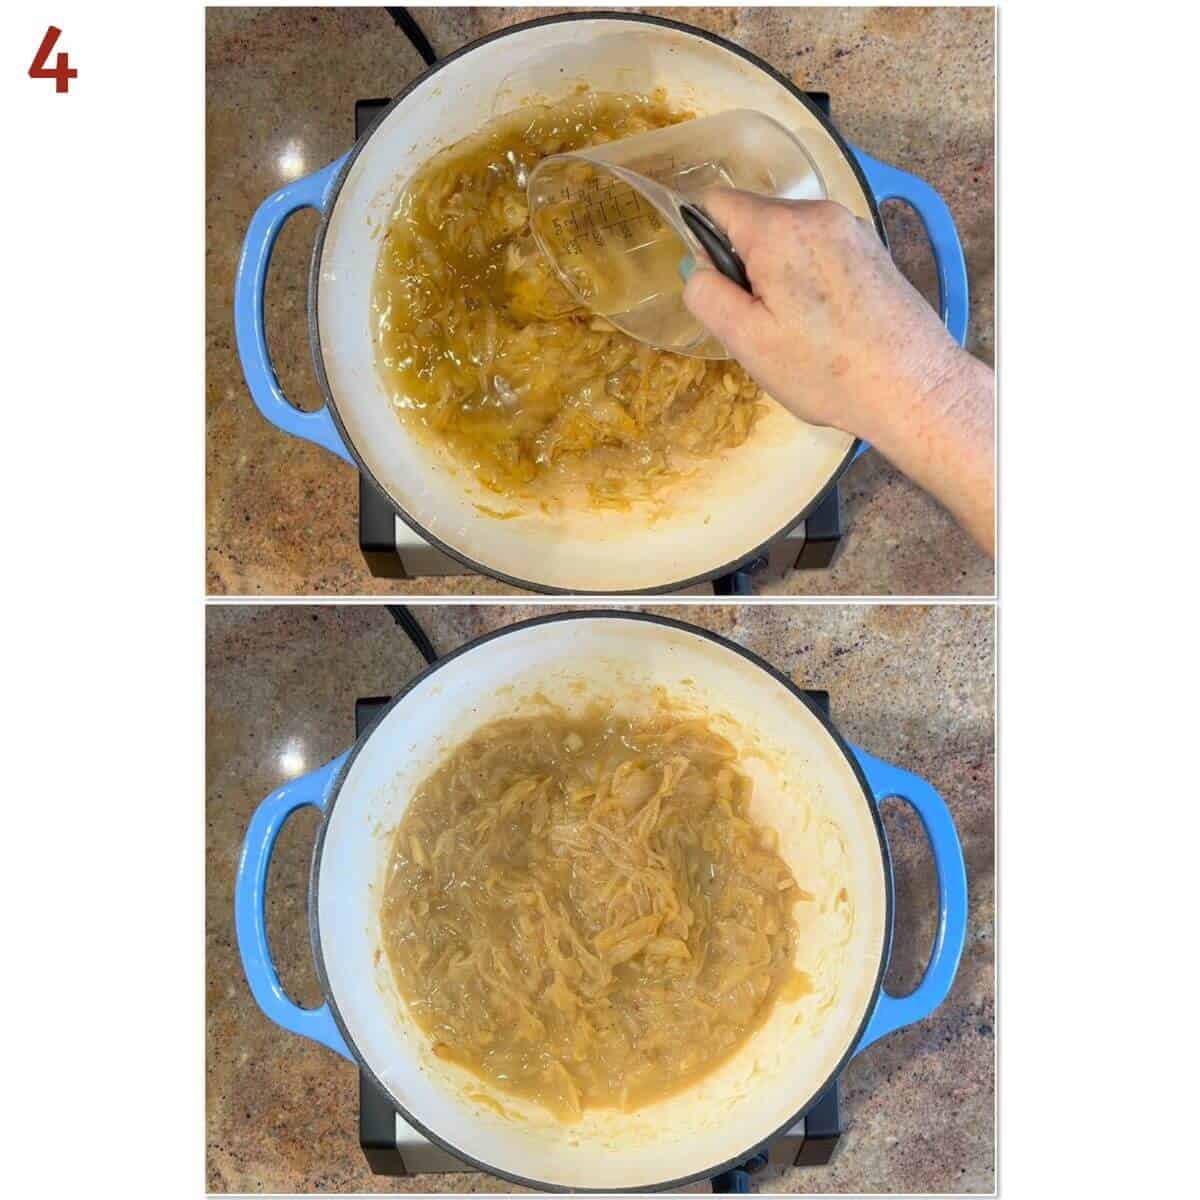 Collage of before and after deglazing caramelized onions with white wine.